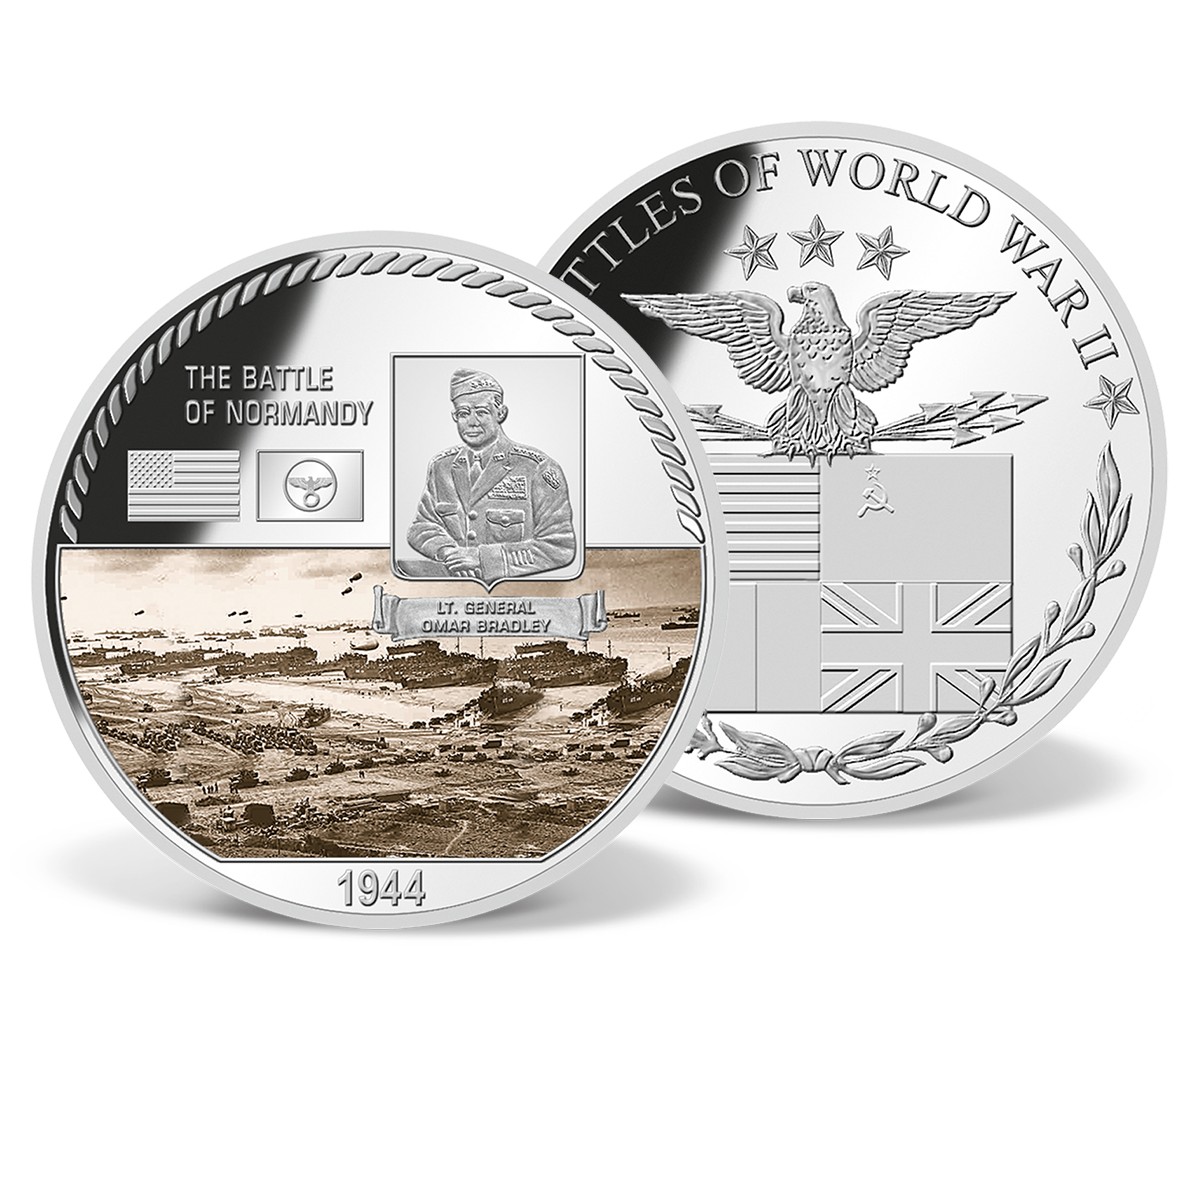 The Battle of Normandy Commemorative Color Coin